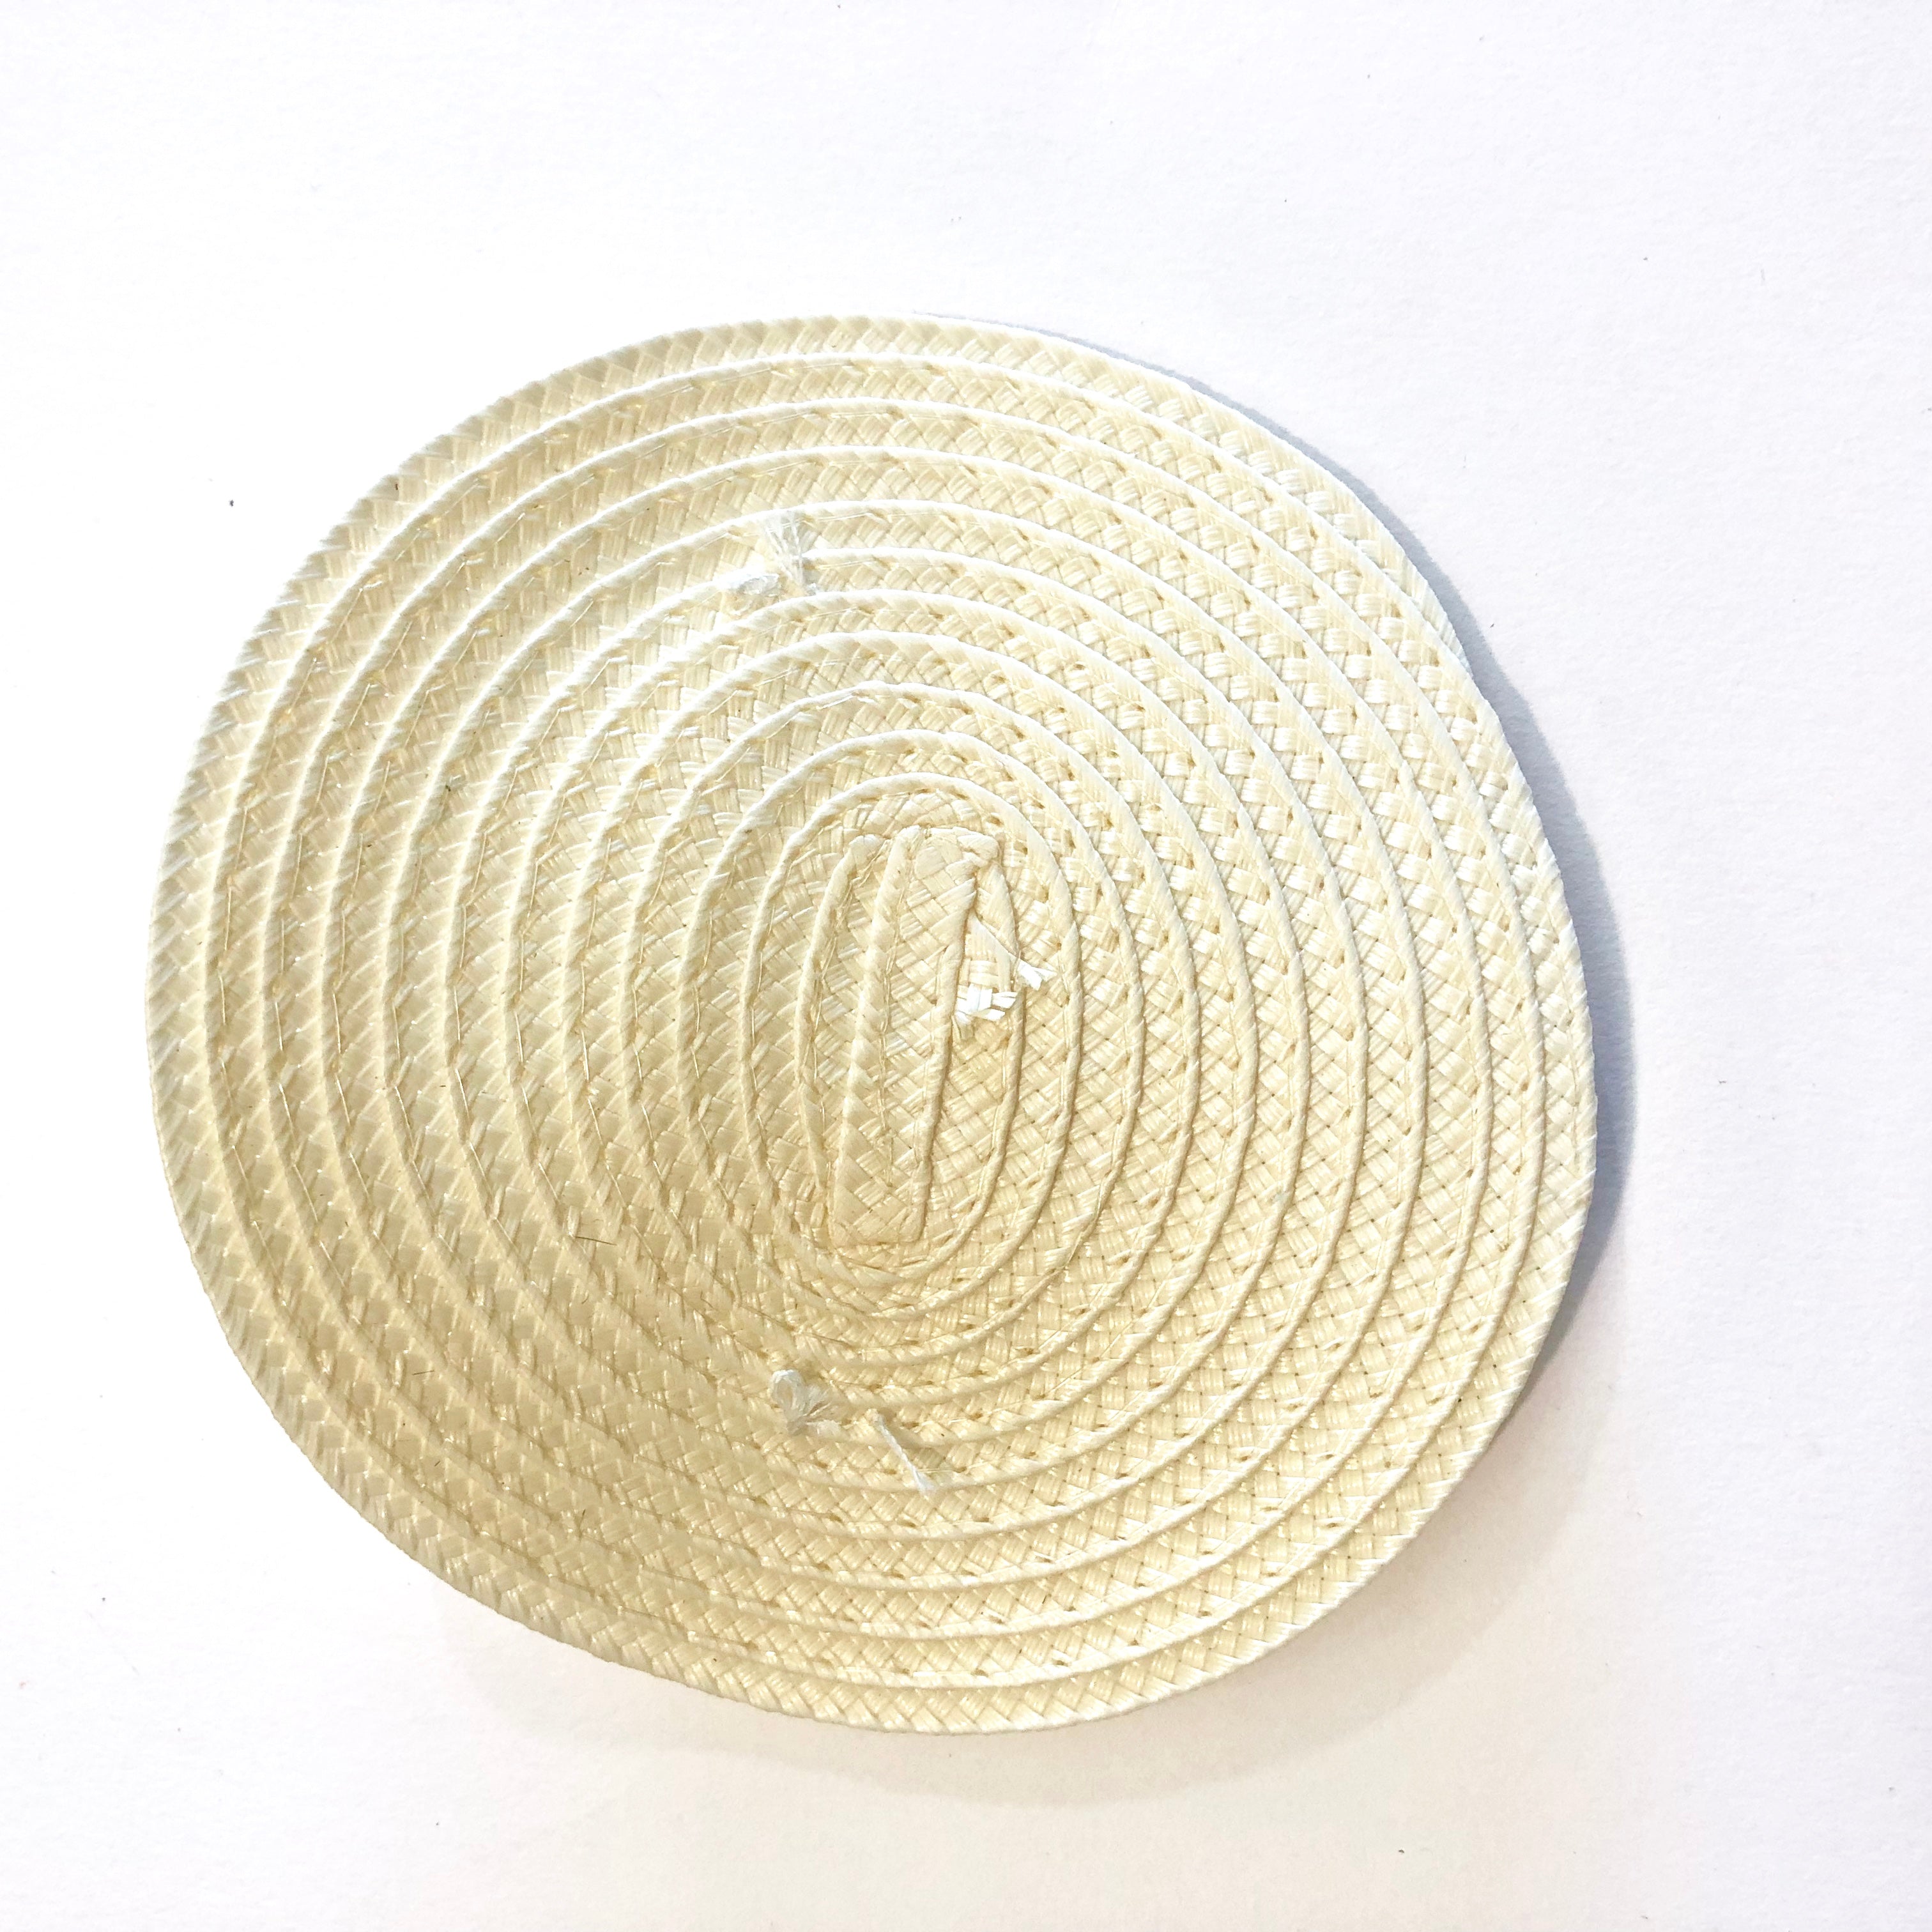 Polybraid 100mm Round Disc Millinery Fascinator Base with Comb x 5 pcs - Ivory ((SECONDS))